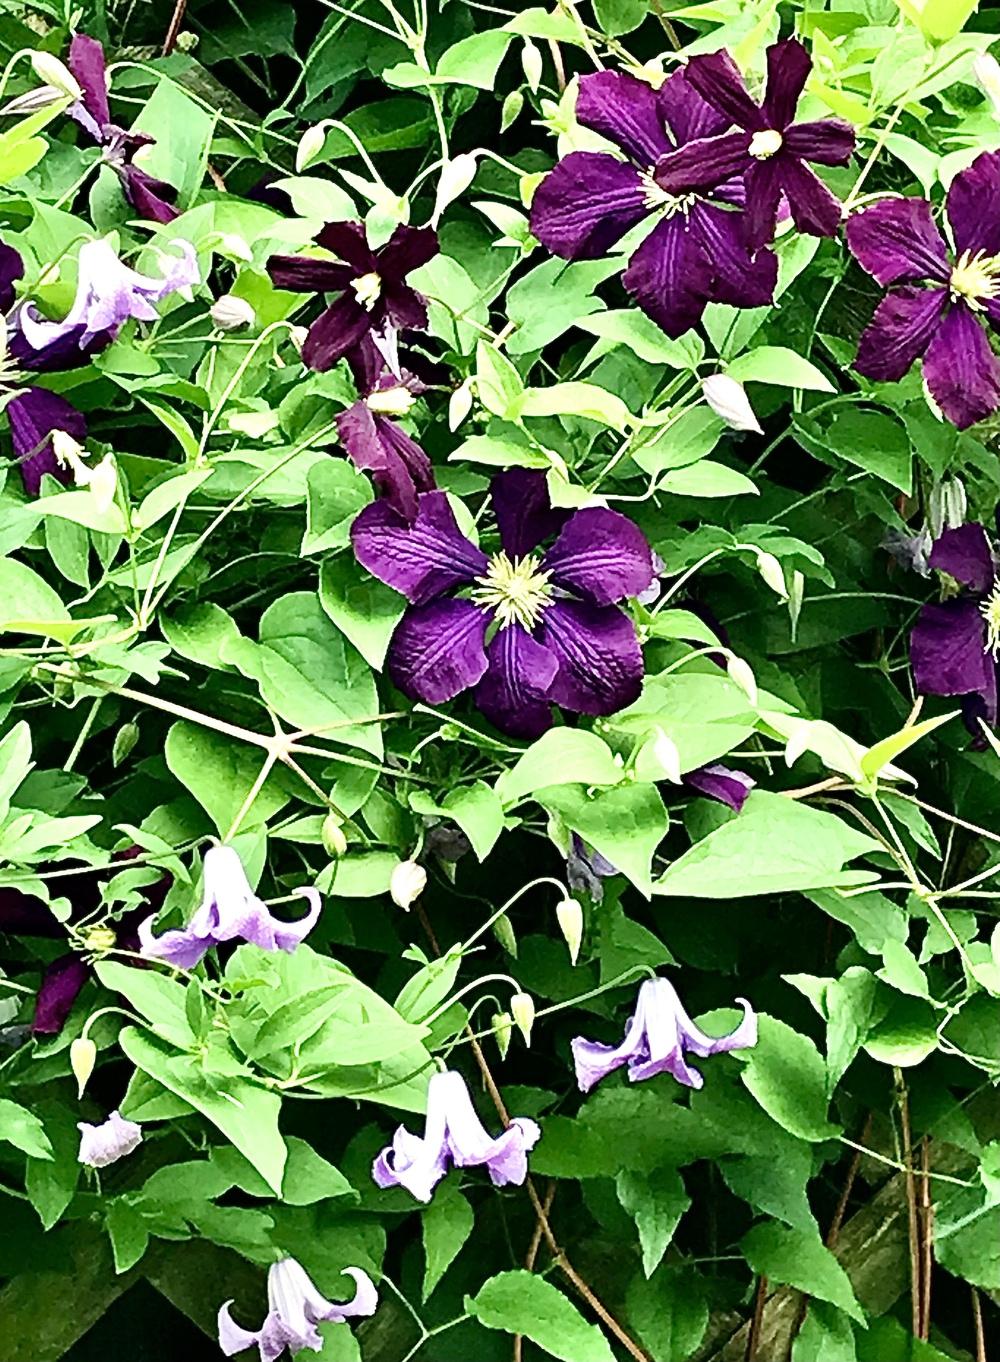 Photo of Clematis (Clematis viticella 'Etoile Violette') uploaded by BeautifulRoots